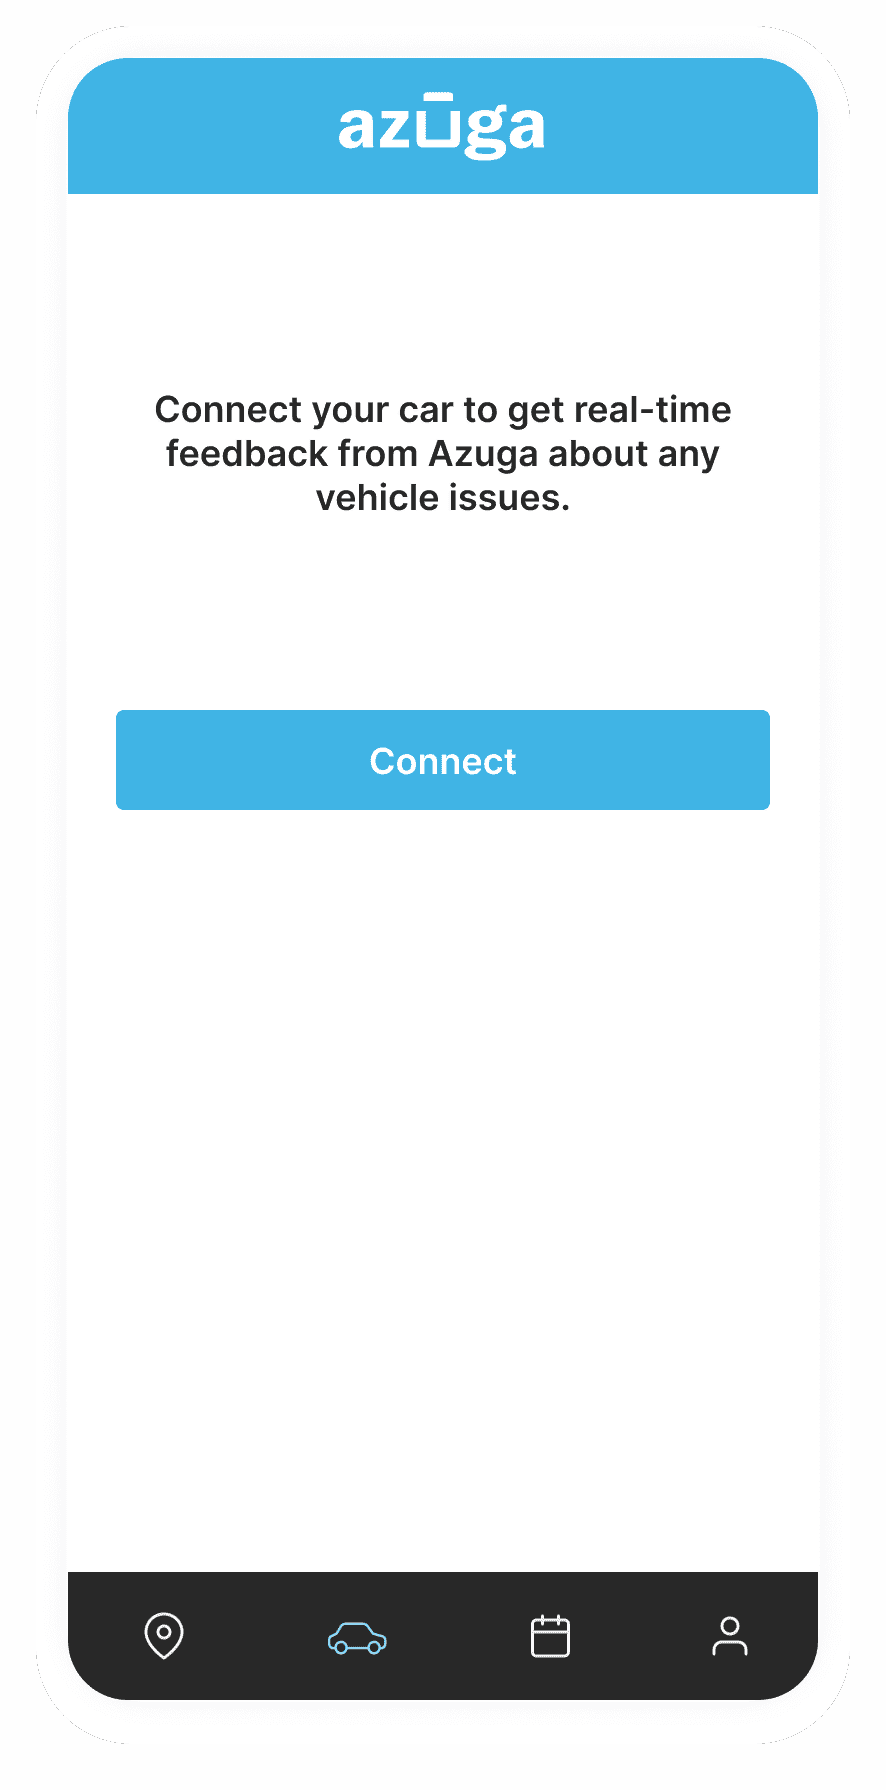 Azuga mobile app prompting the user to connect their car to get real-time feedback about any vehicle issues